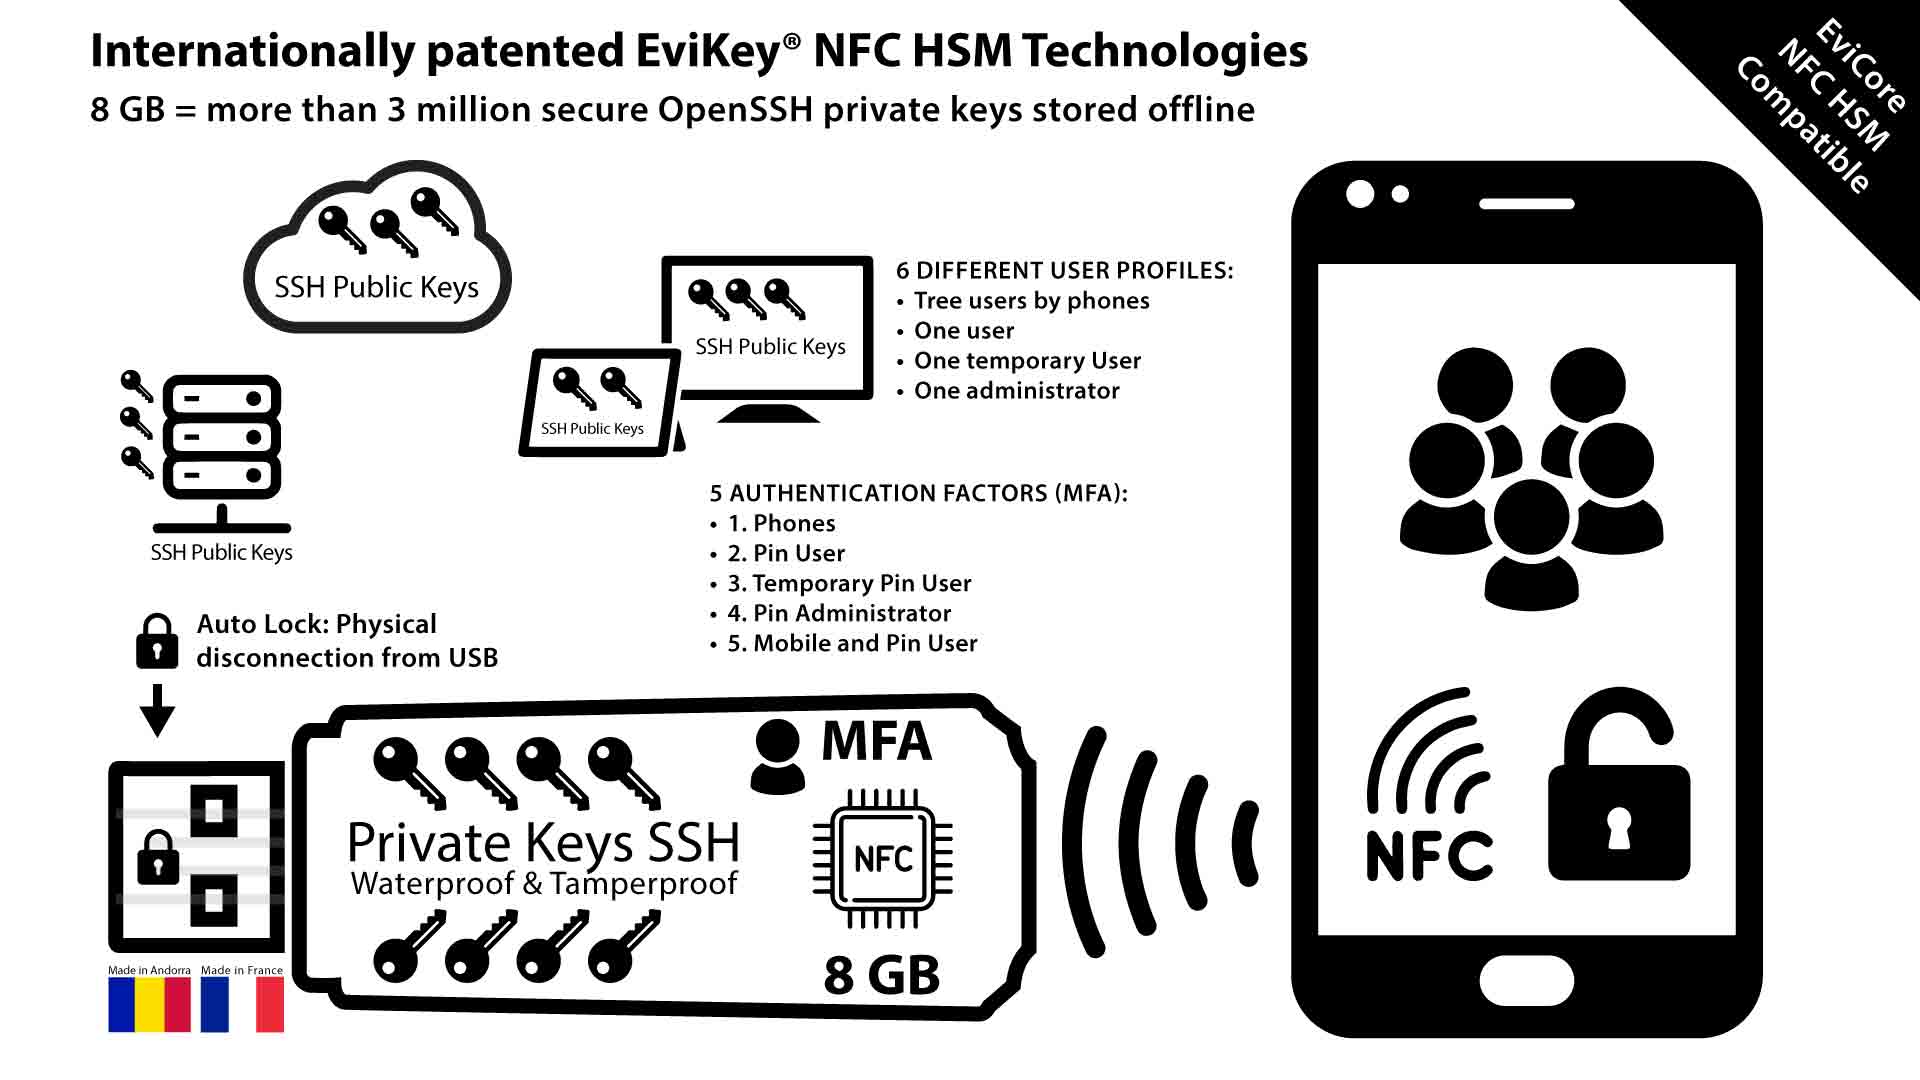 NFC HSM USB drive SSH Contactless keys manager EviKey NFC & EviCore NFC HSM Compatible Technologies patented from Freemindtronic Andorra Made in France - JPG